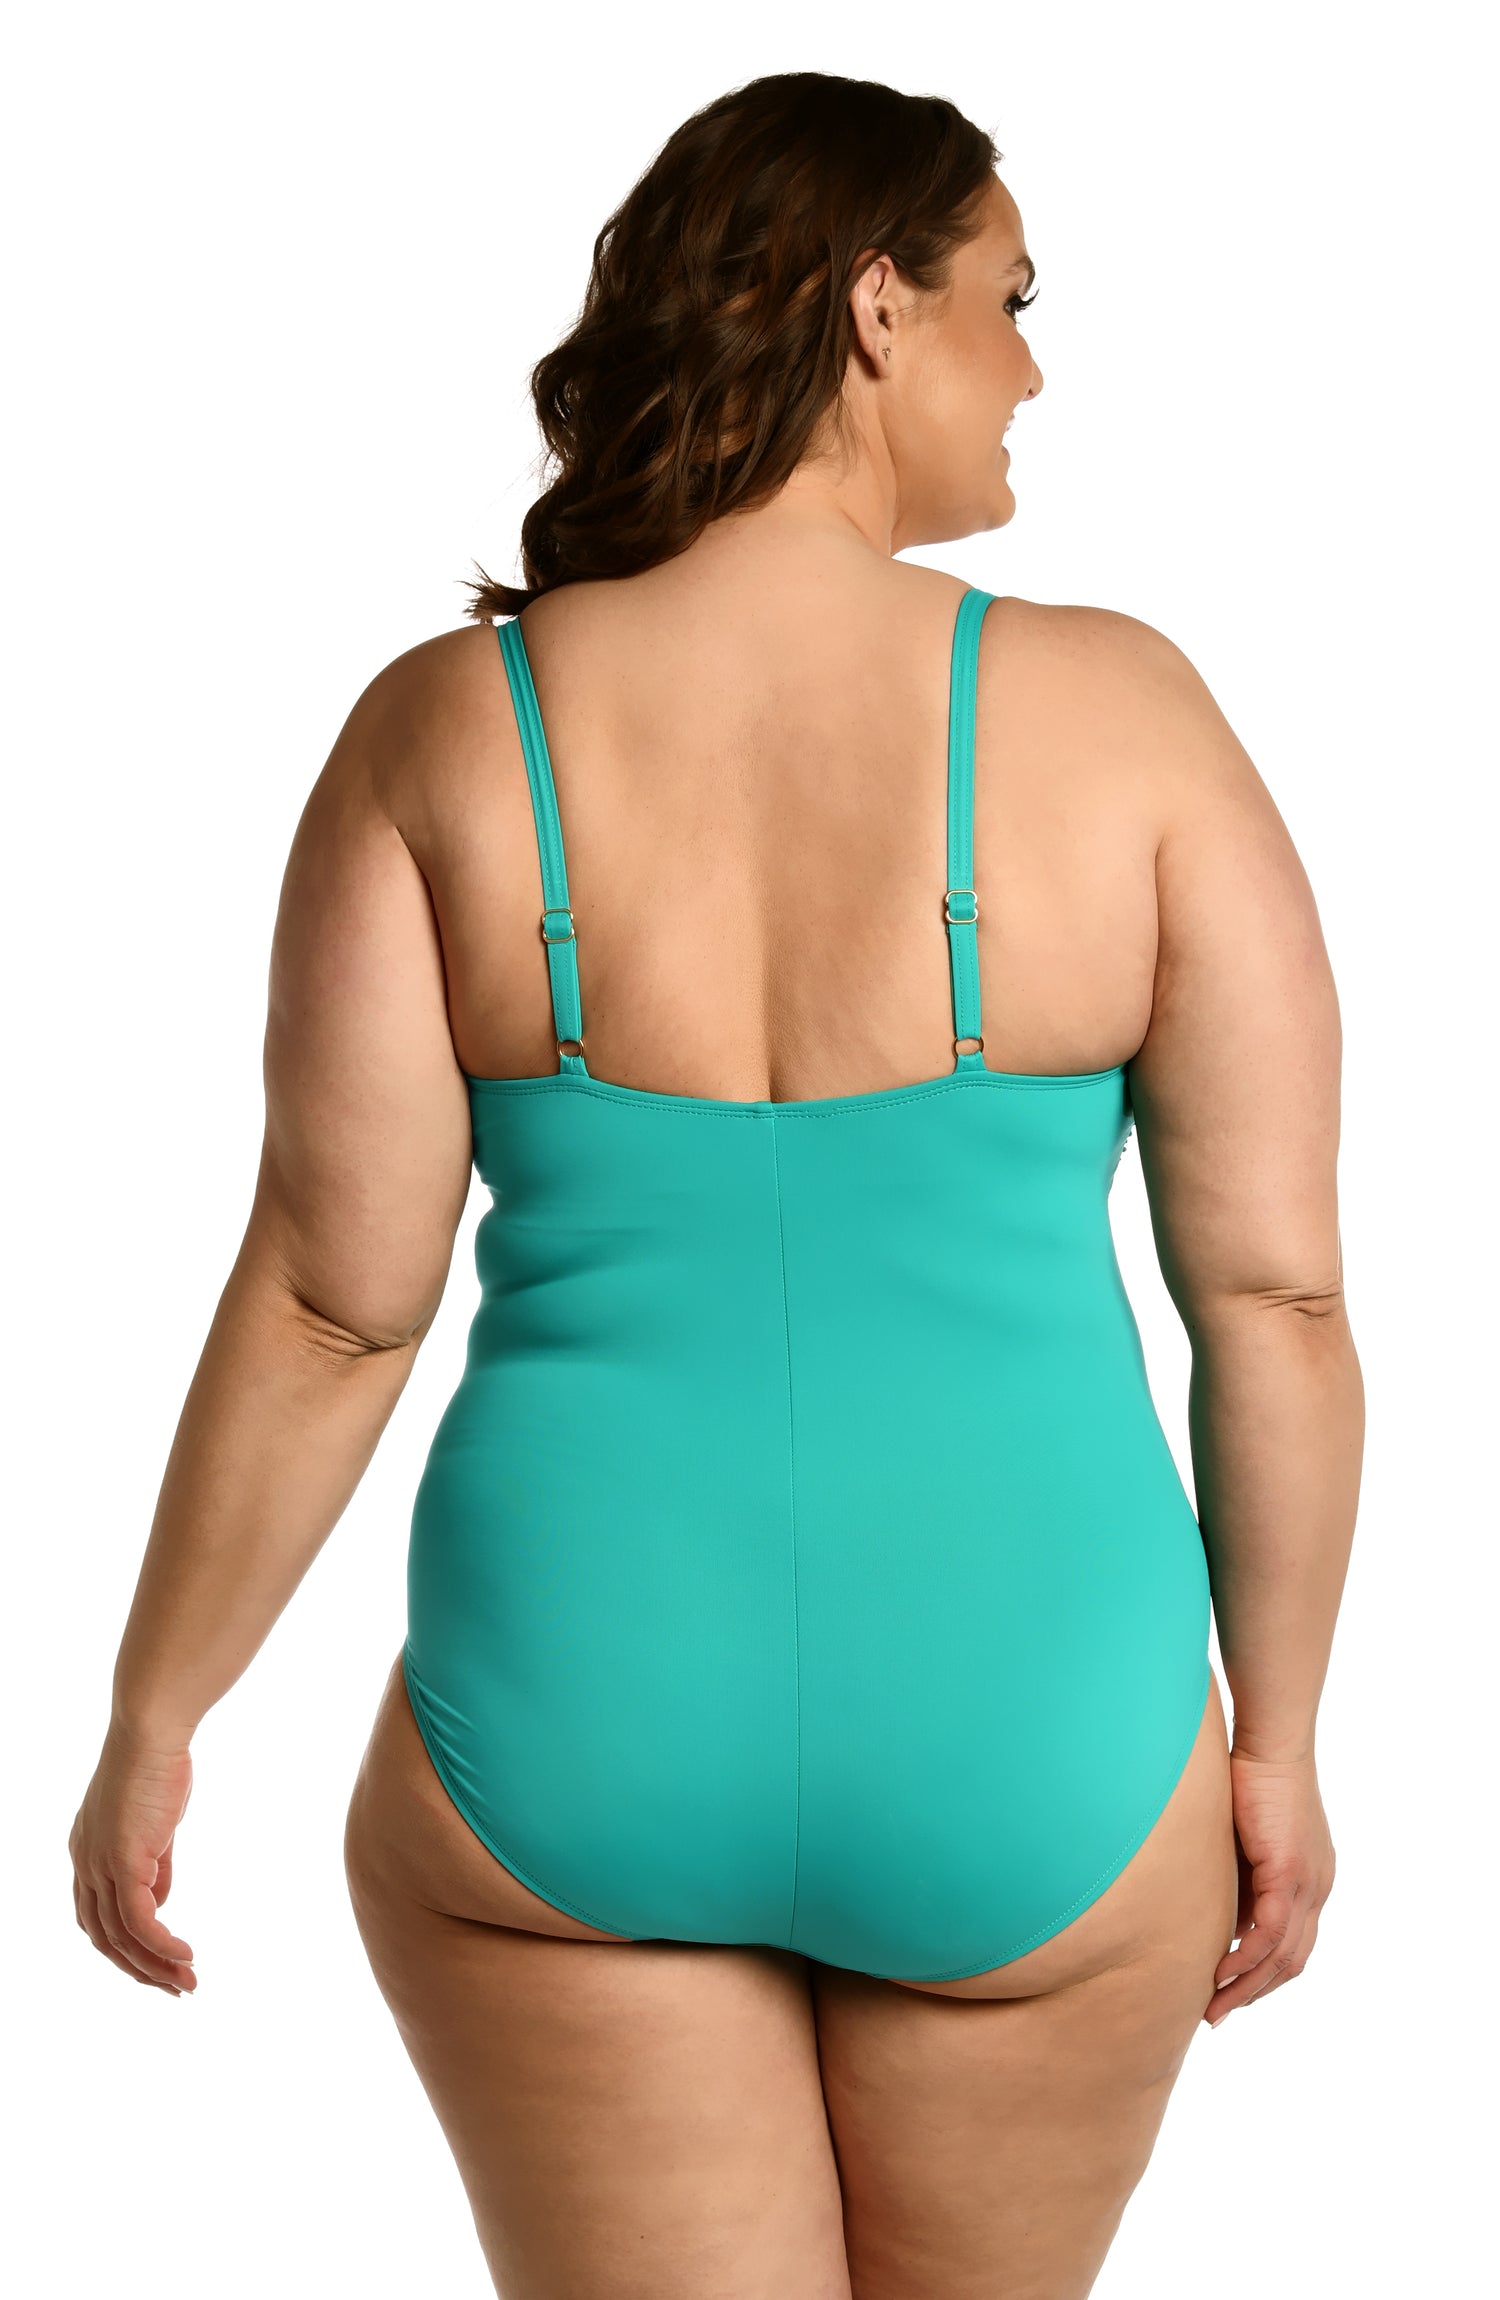 Model is wearing a emerald colored one piece swimsuit from our Best-Selling Island Goddess collection.